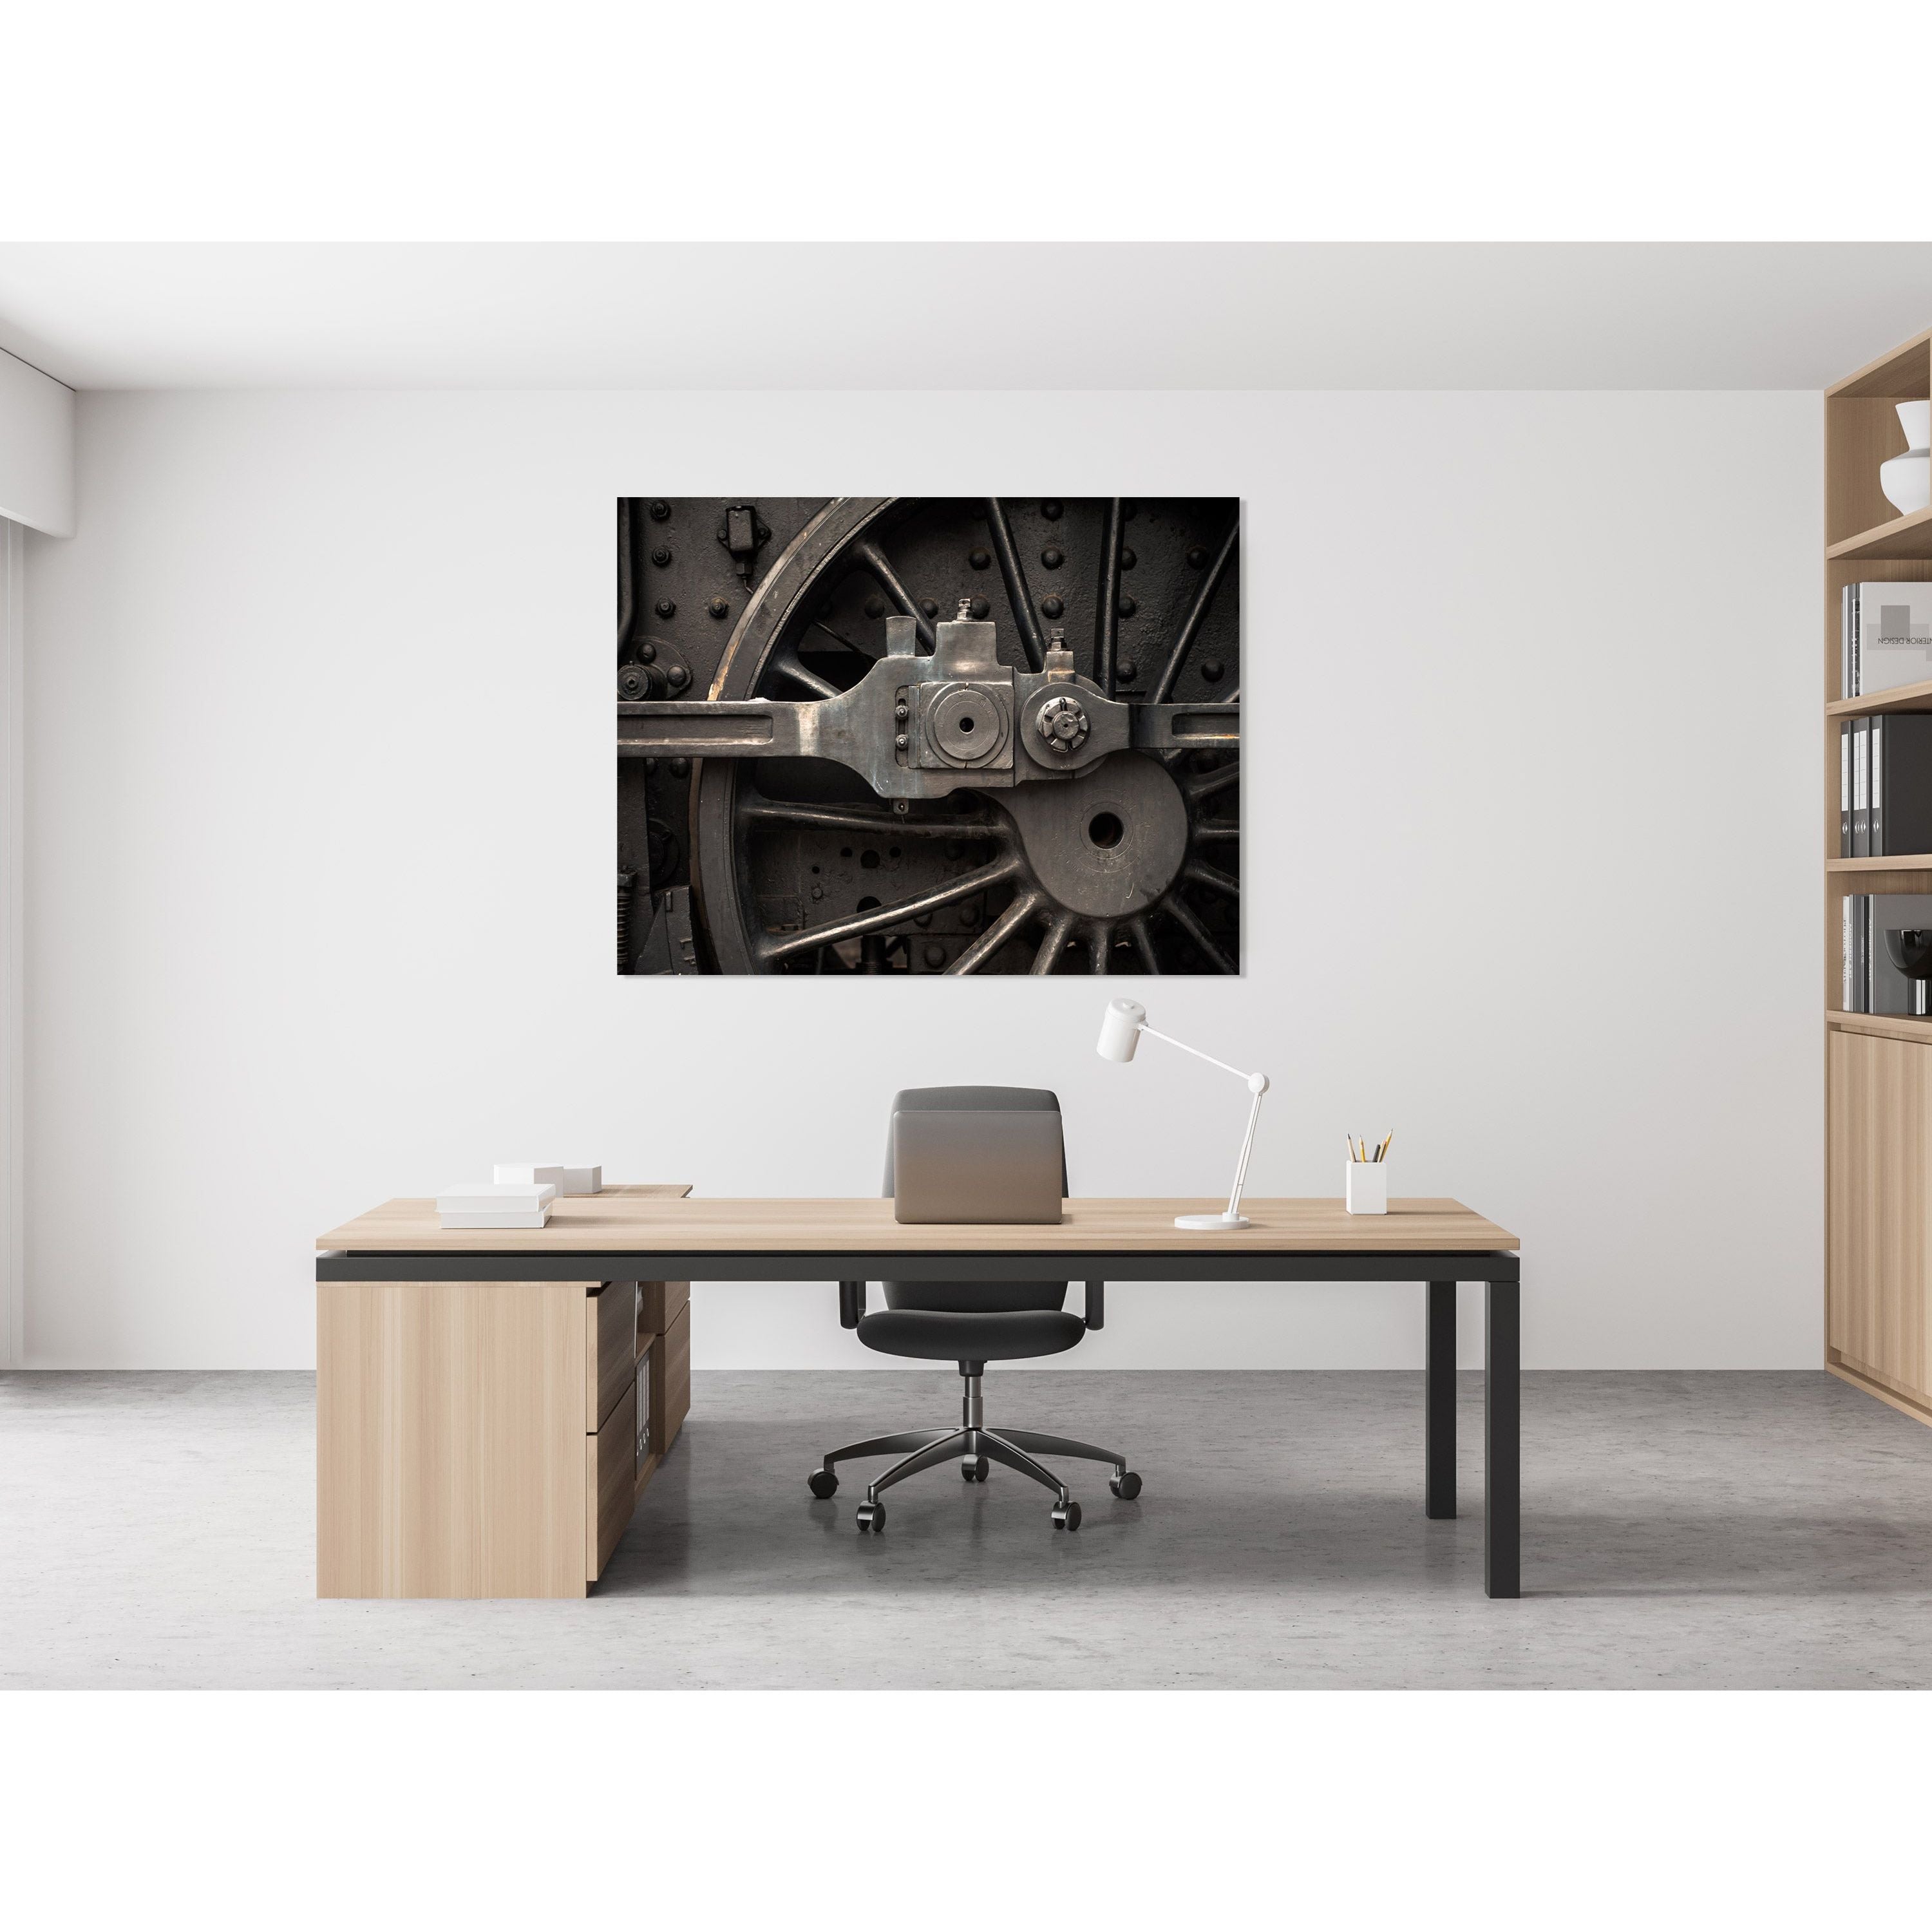 AFD Home  Train Locomotive Wheel Close Up Gallery Wrap - New Star Living